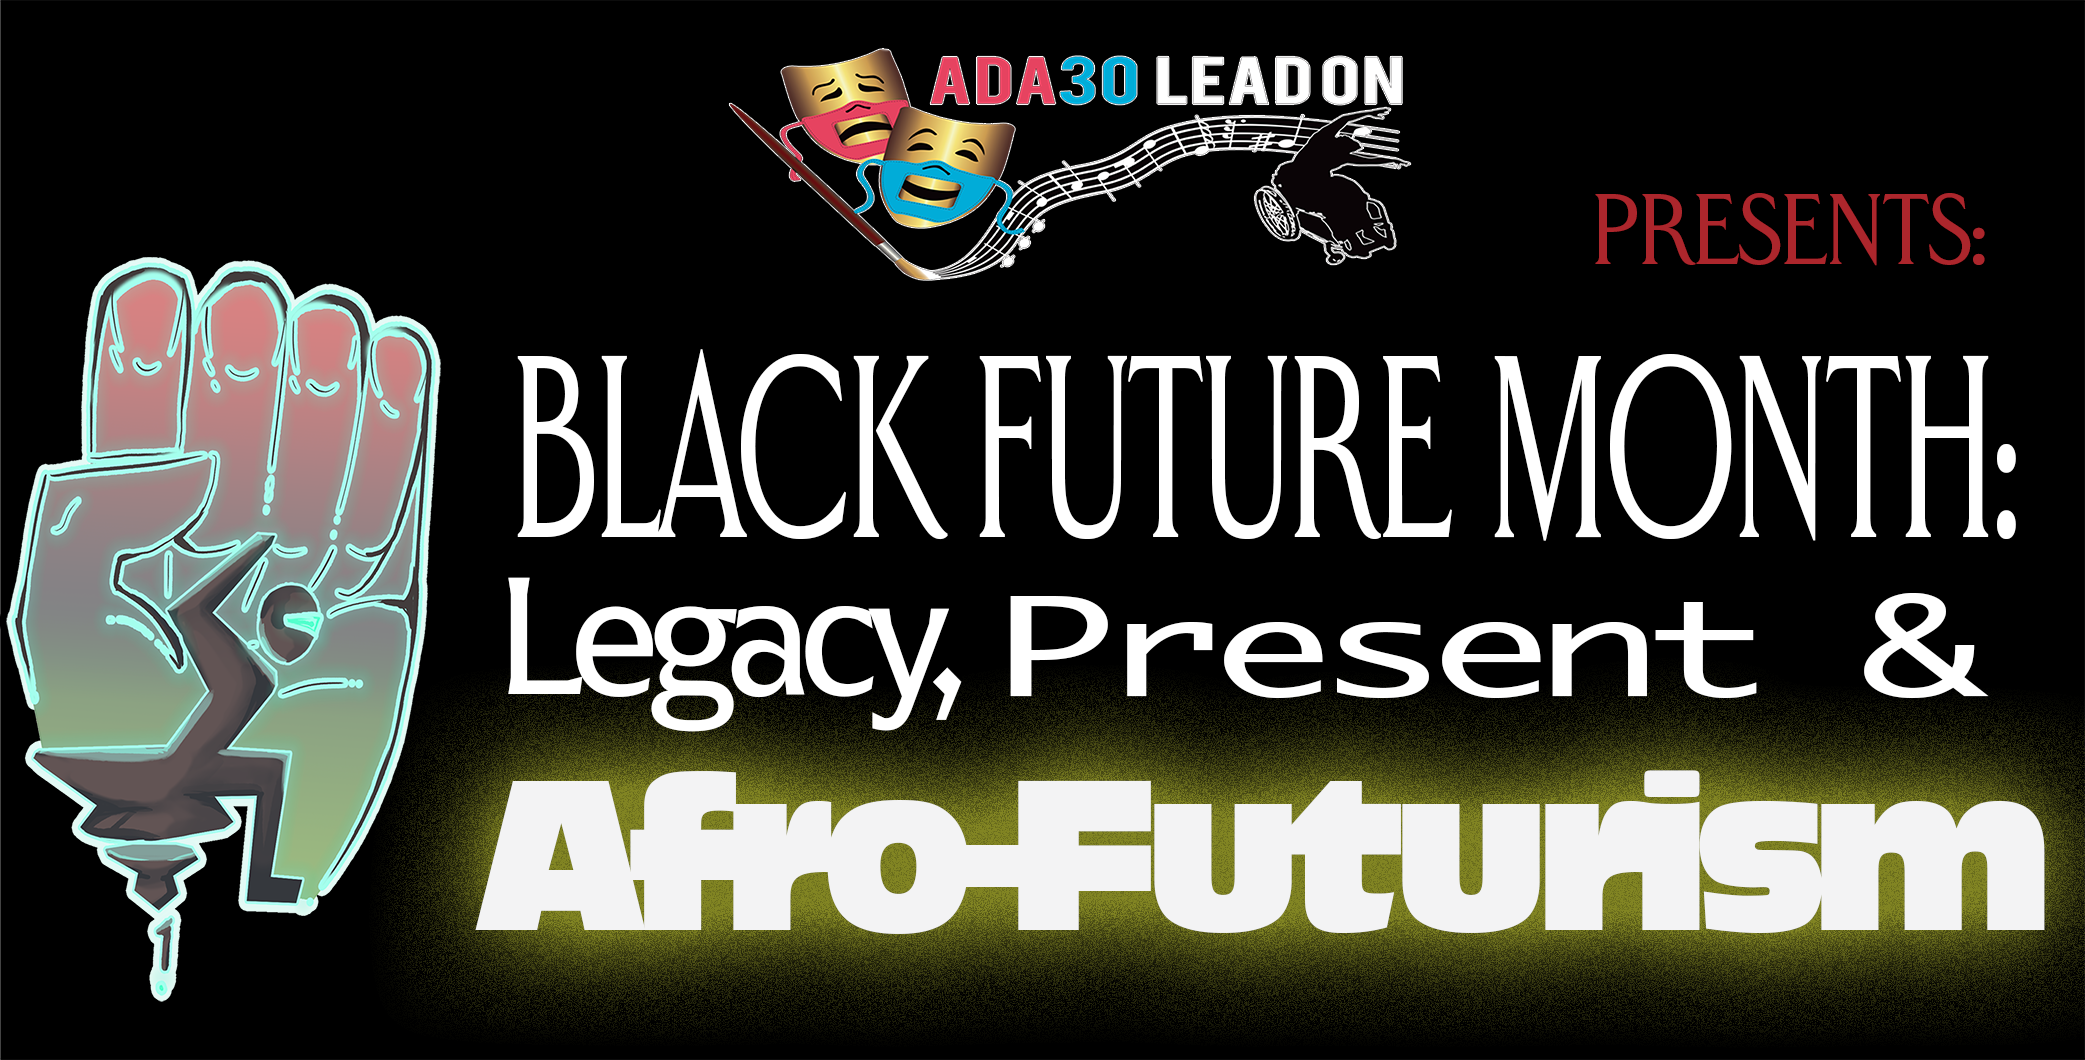 White letters appear on a black background: “Black Future Month: Legacy, Present & Afro-Futurism.” There is a yellow glow emanating from the word “Afro-Futurism” that is more bold and thicker that the other letters. Above Black Future Month is the ADA30 Lead On logo: Gold comedy and tragedy masks with red and blue accessible (lip-readable) PPE face masks show the smile of comedy and the frown of tragedy, next to a paintbrush that is creating a musical staff, and silhouette of Alice Sheppard, a Black dancer using a wheelchair. The text continues with “Presents’ in red letters. In front of Black Future Month is a Black Power fist with a Black stylized wheelchair user wearing a face visor, fist raised, leaning forward on the seat of a futuristic mobility device not propelled by wheels.